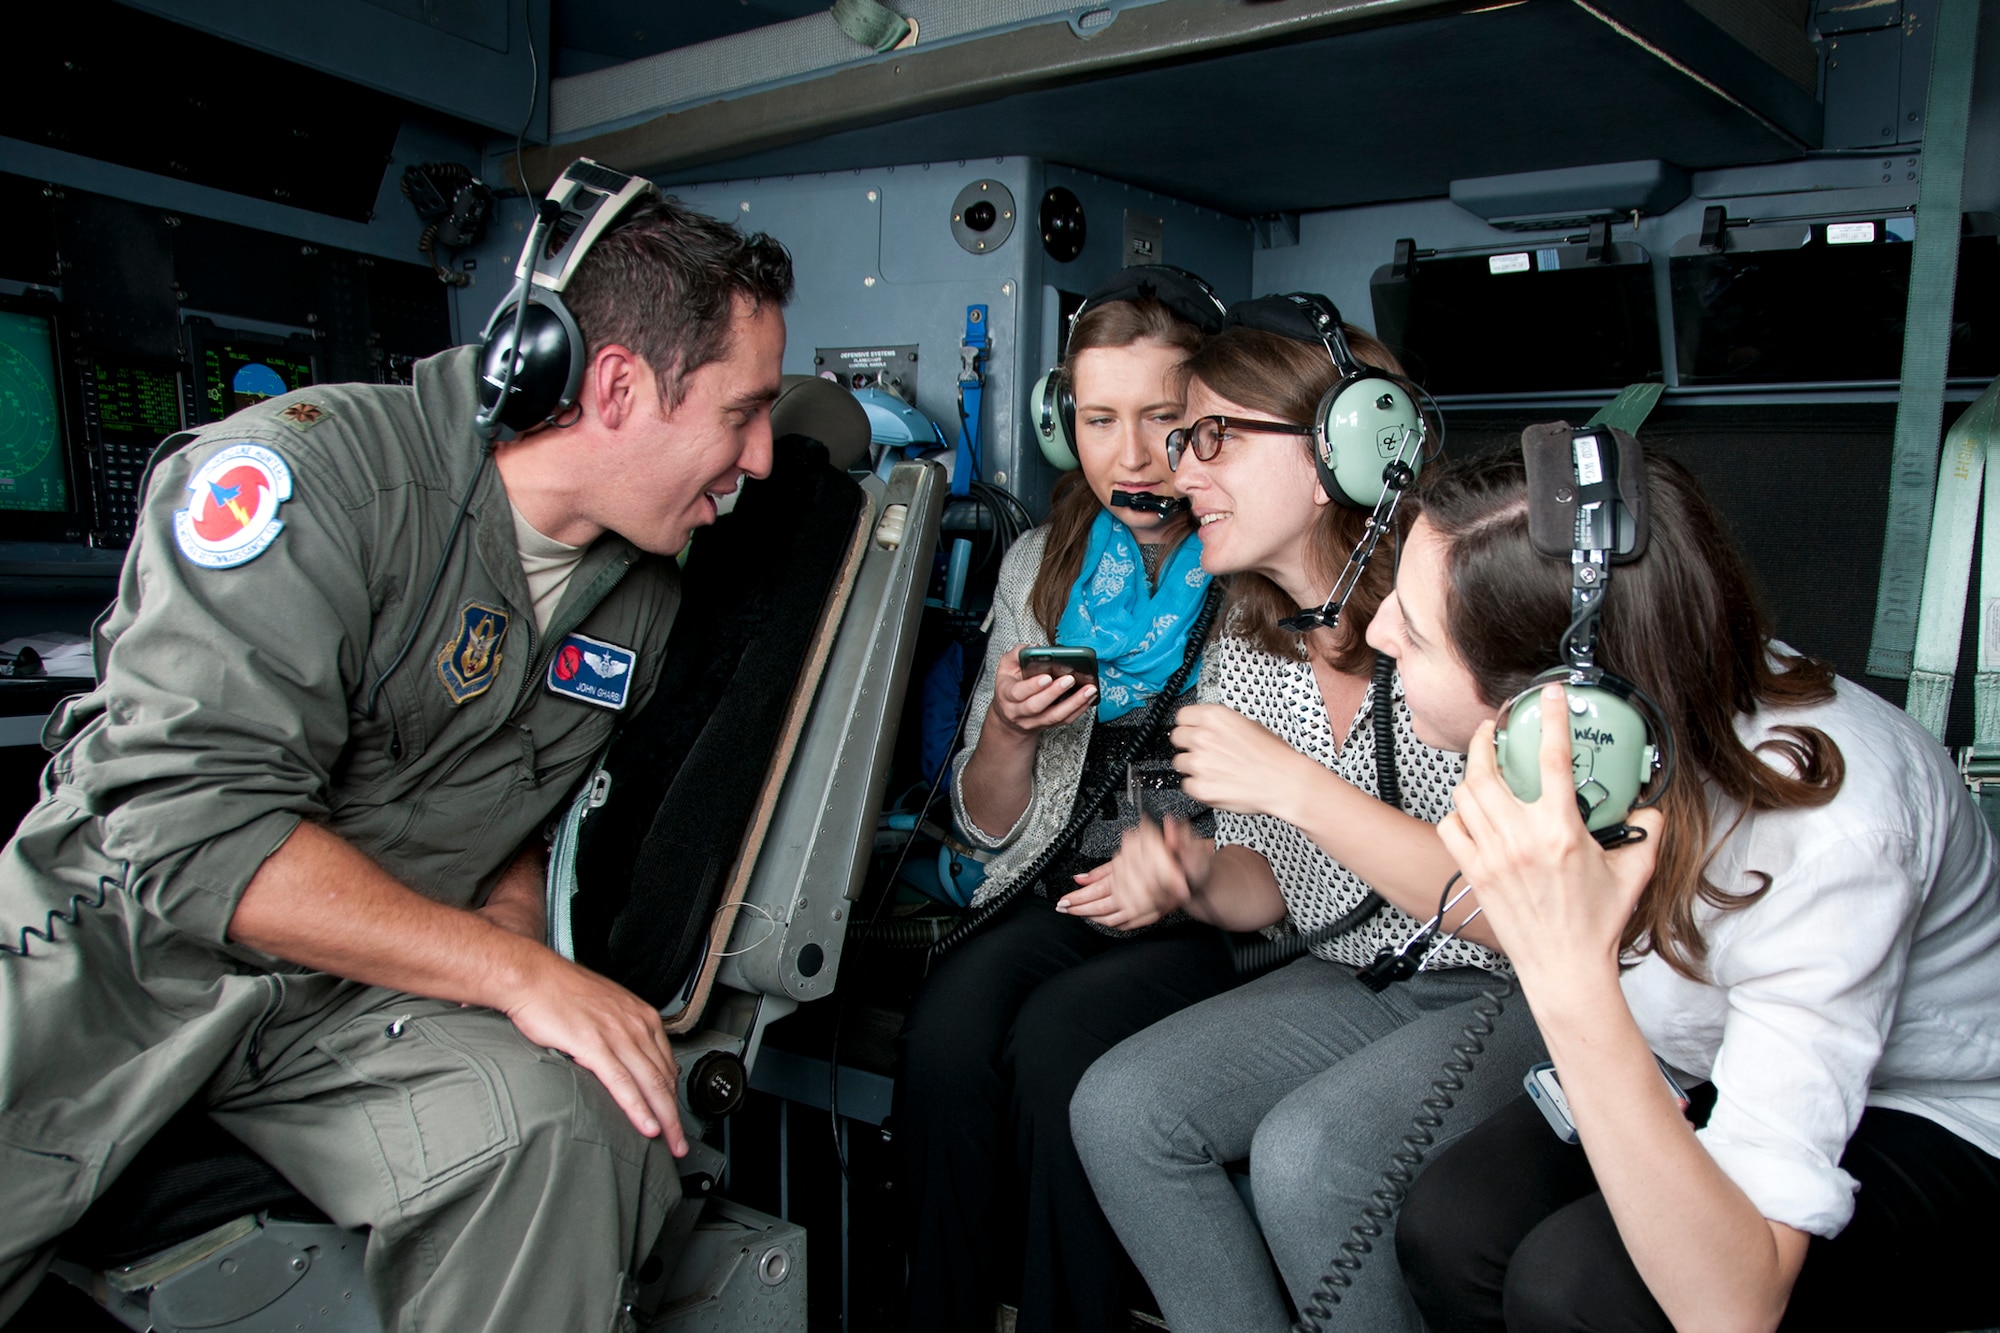 Major John Gharbi, 53d Weather Reconnaissance Squadron “Hurricane Hunters” navigator, speaks with members of the media during a flight over Maryland June 28, 2016. As part of the 100th anniversary of air power in the U.S. military, members of the media were invited to fly with the Hurricane Hunters and learn about their weather surveillance mission. With ten deployable C-130s, the unit has the only routine aerial weather reconnaissance mission in the world. (U.S. Air Force photo/Staff Sgt. Kat Justen)